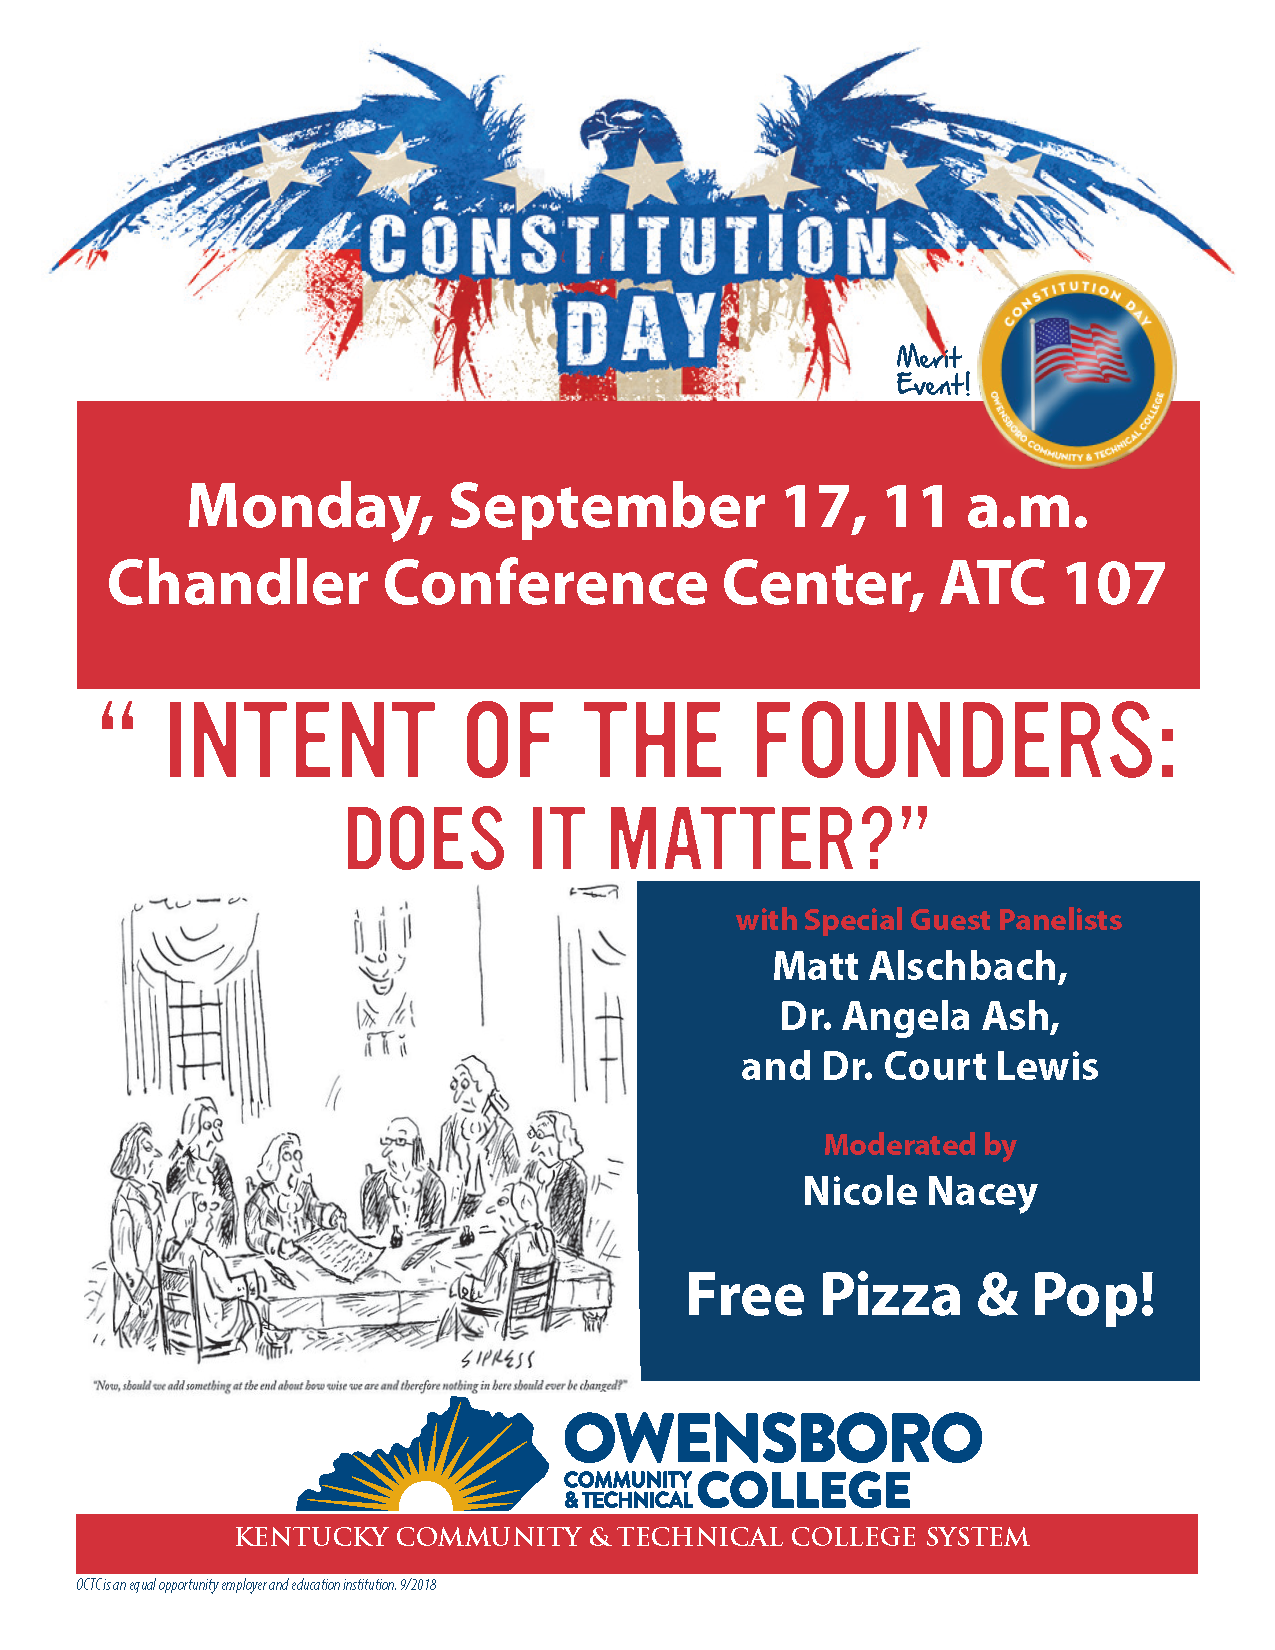 flyer promoting constitution day